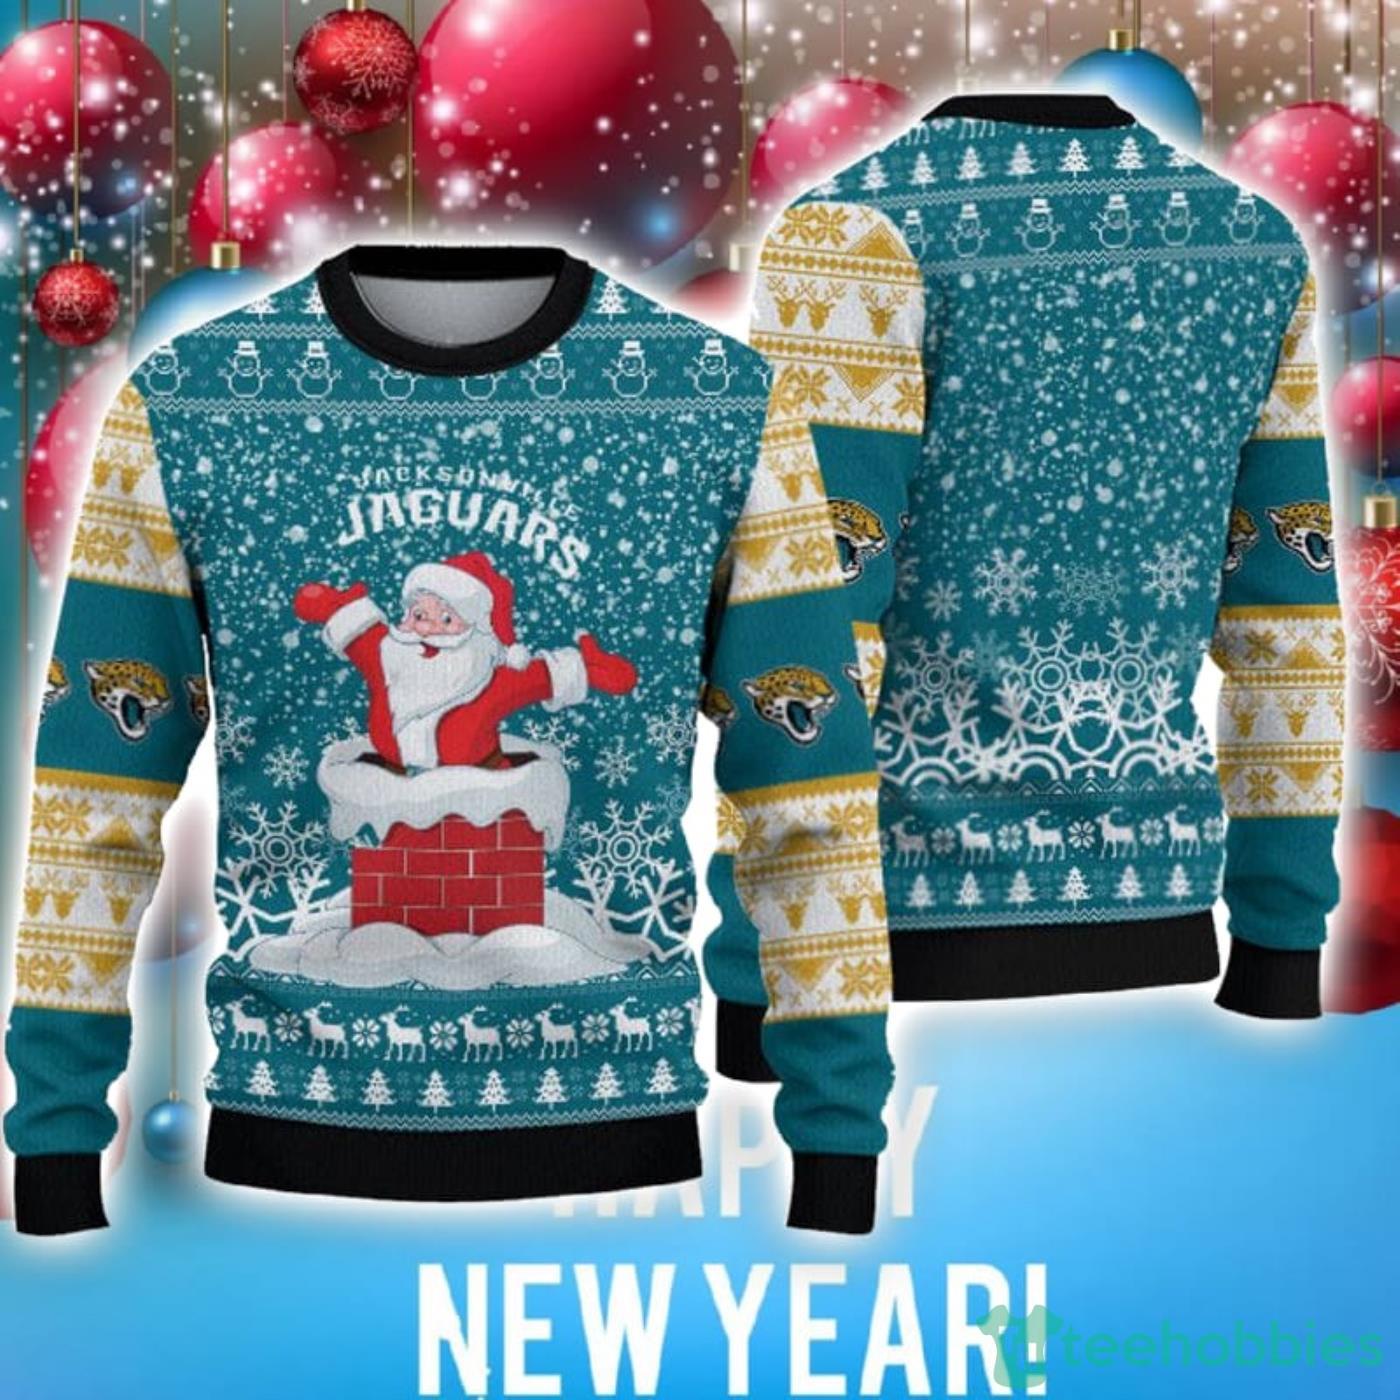 Jacksonville Jaguars Christmas Santa Claus Pattern Special Trend Ugly Christmas Sweater Product Photo 1